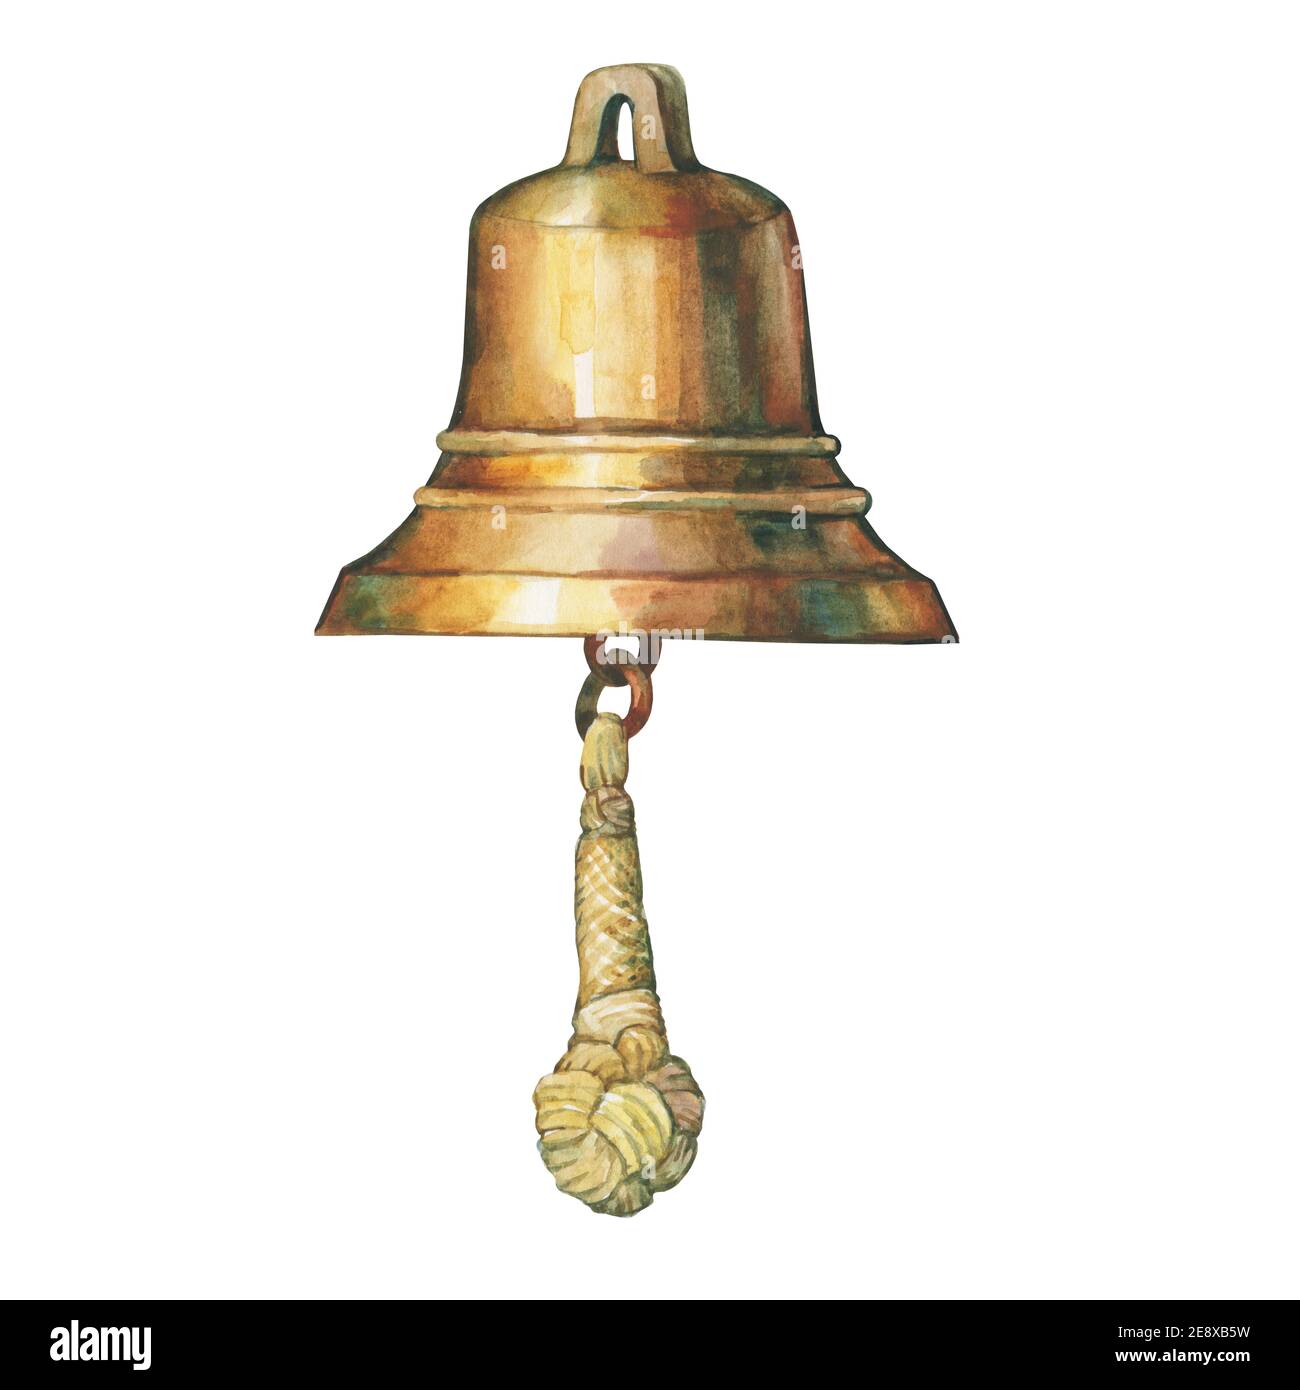 Illustration of old ship's bell. Hand drawn watercolor painting on white background. Stock Photo